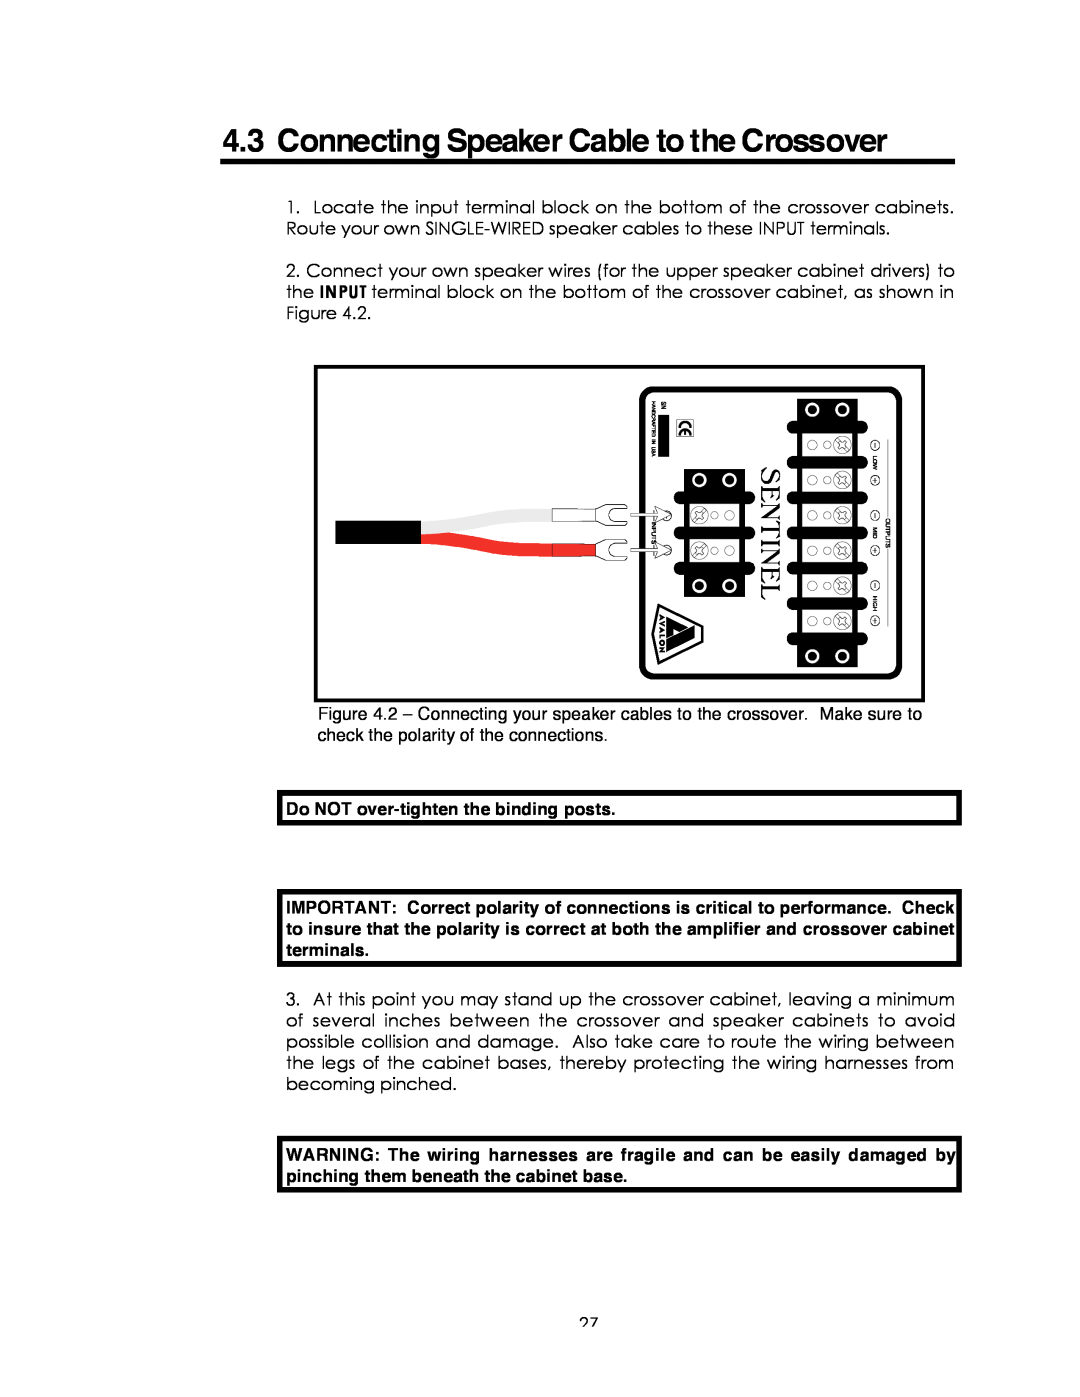 Avalon Acoustics Sentinel manual 4.3Connecting Speaker Cable to the Crossover, Do NOT over-tightenthe binding posts 